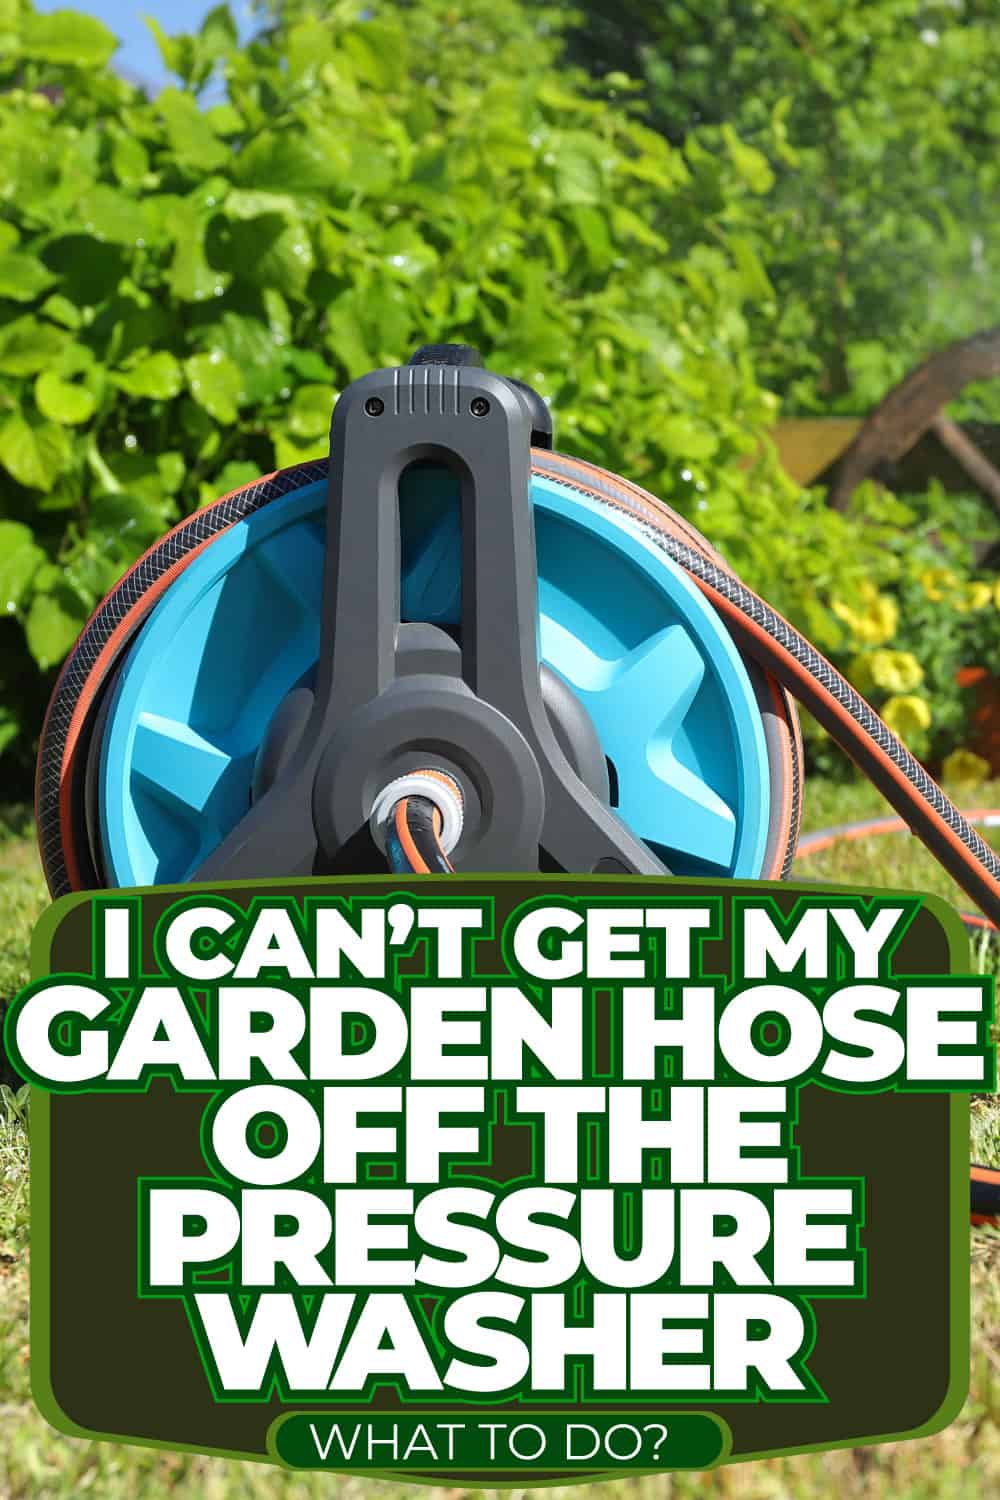 I Can't Get My Garden Hose Off The Pressure Washer - What To Do?